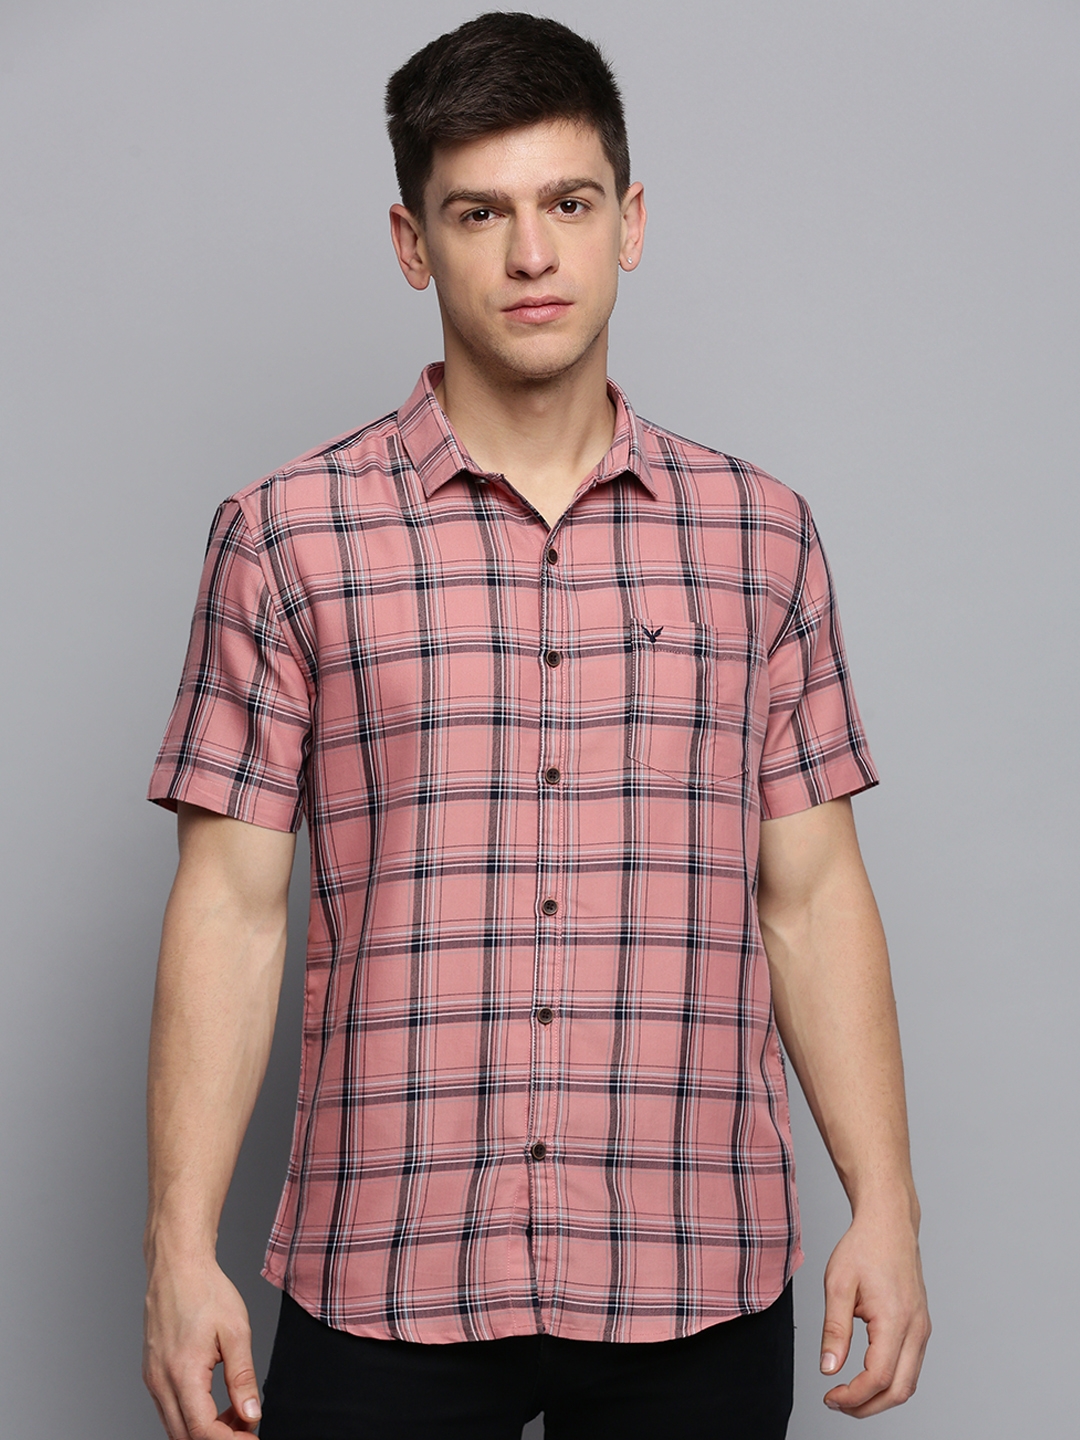 Showoff | SHOWOFF Men's Spread Collar Checked Pink Classic Shirt 1